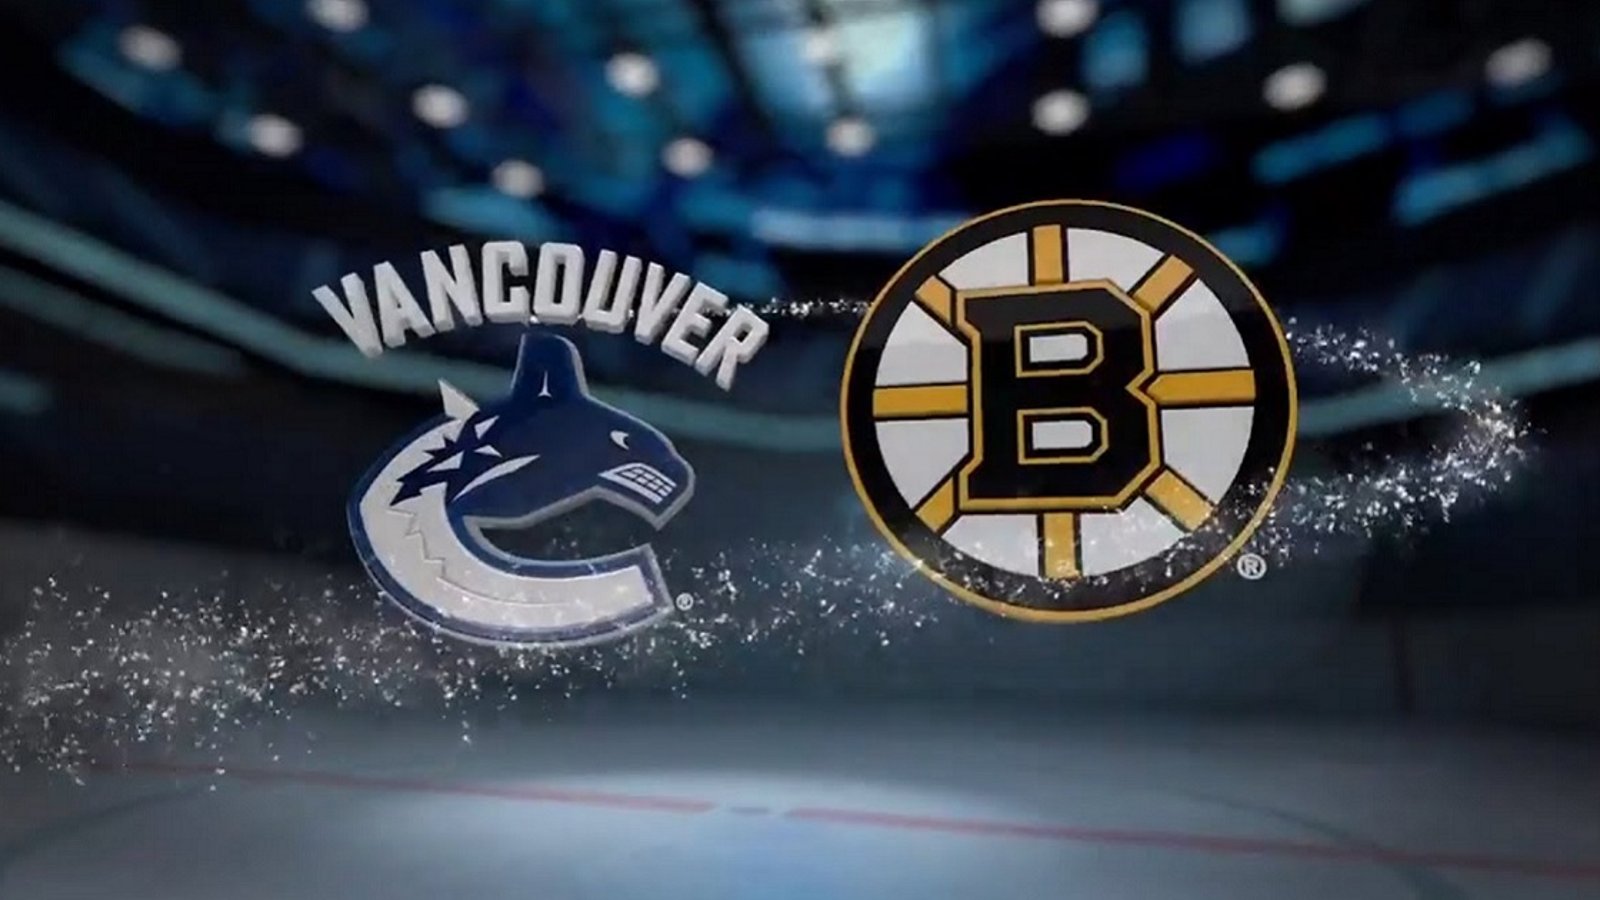 Rumors of a possible deal between the Bruins and Canucks. 